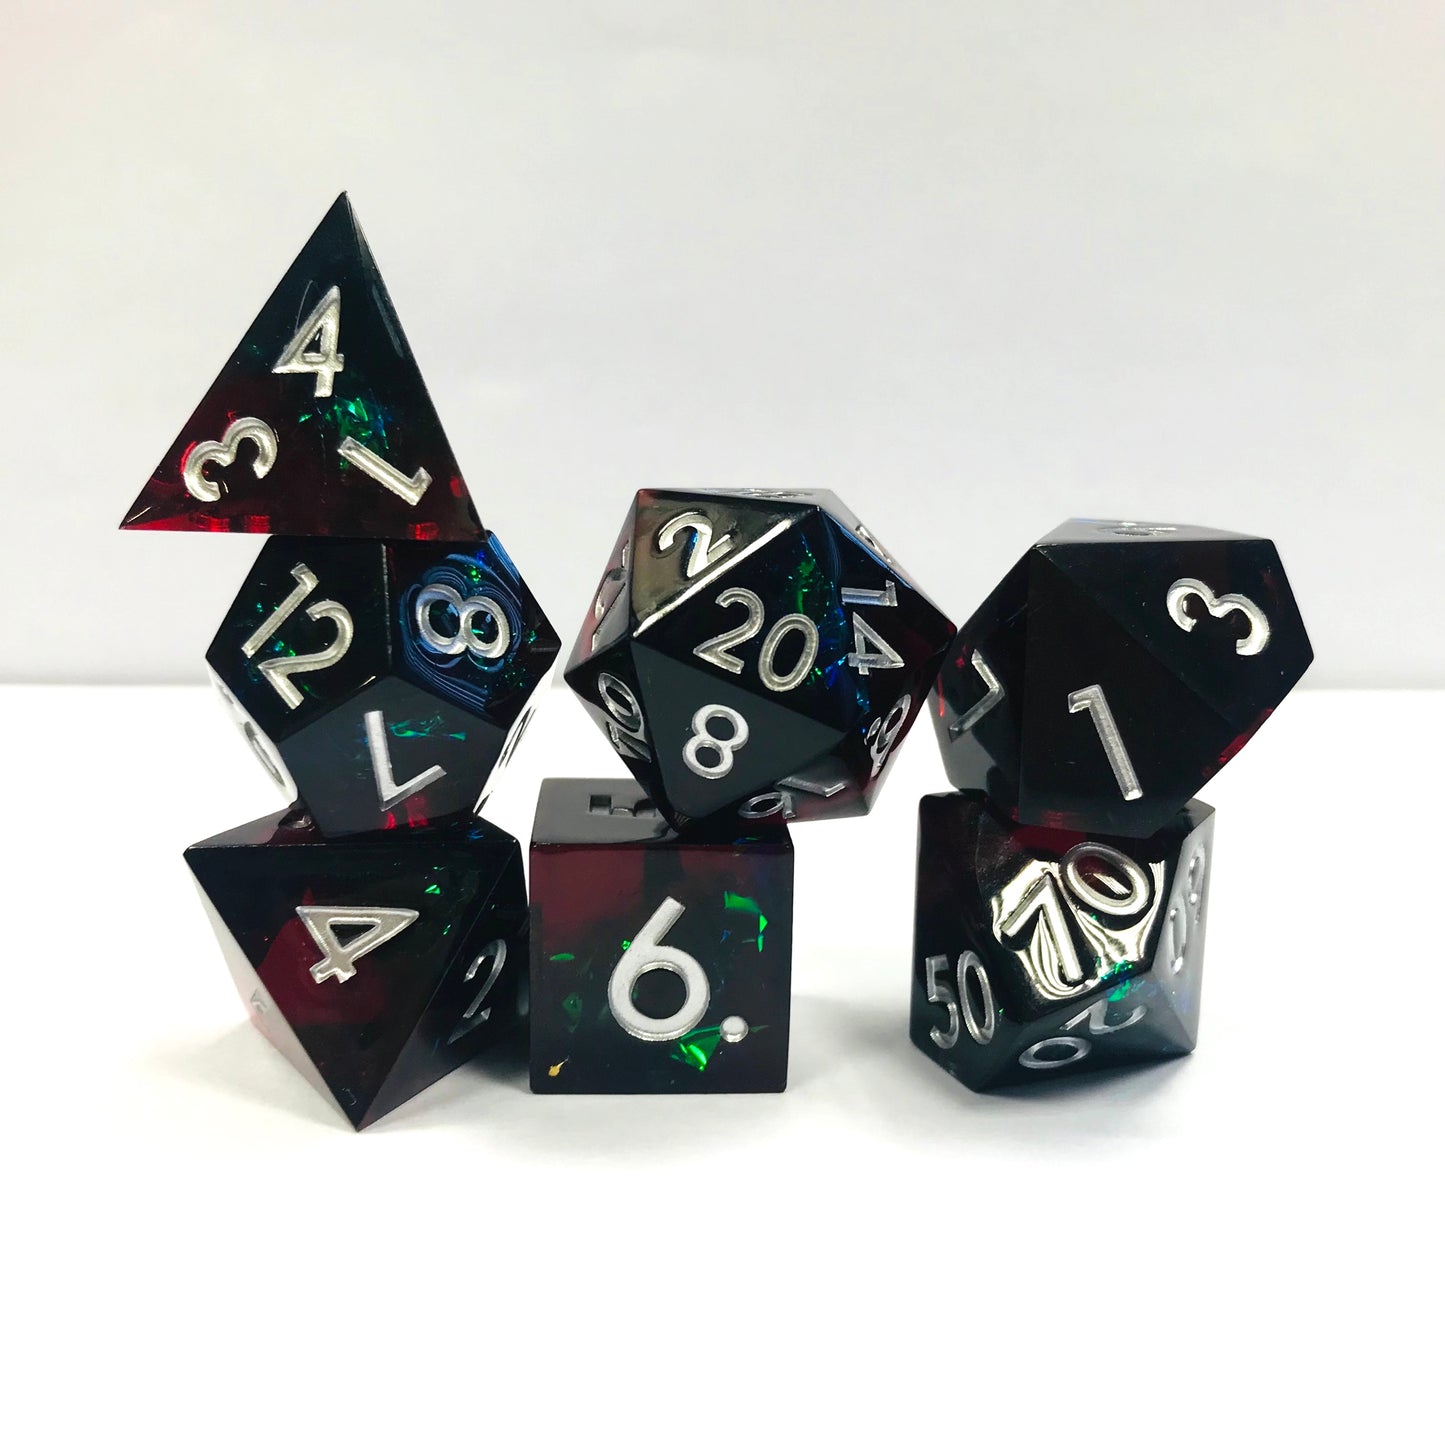 dnd sharp edge dice set for RPG role playing games, dice goblin, dice dragon and critical critter collectors